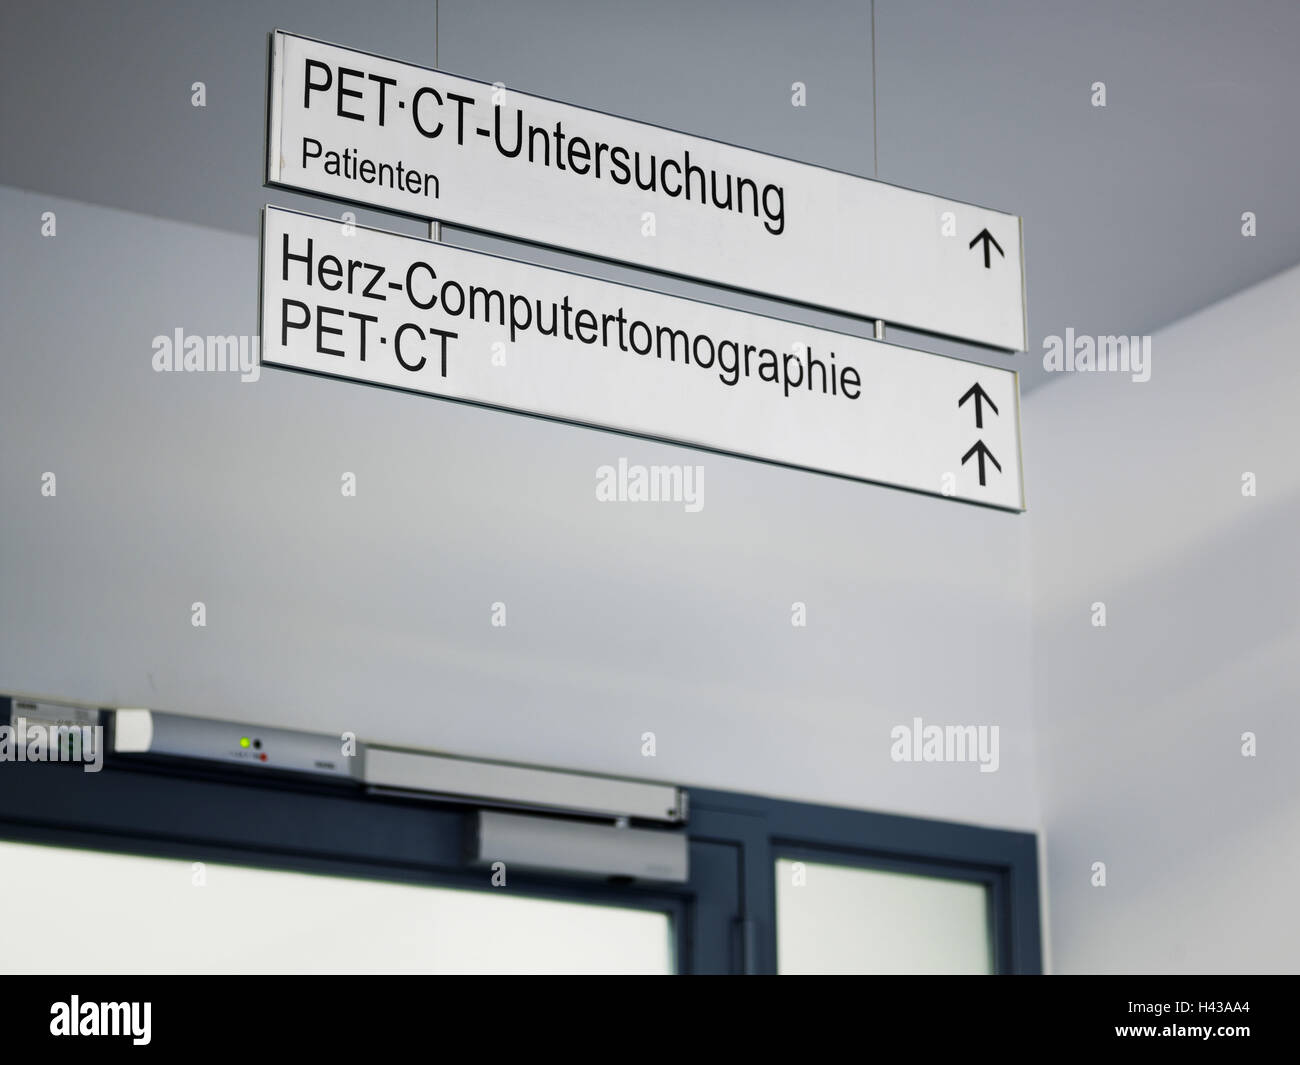 Heart computer tomography, PET ct. examination, information sign, clinic, Stock Photo